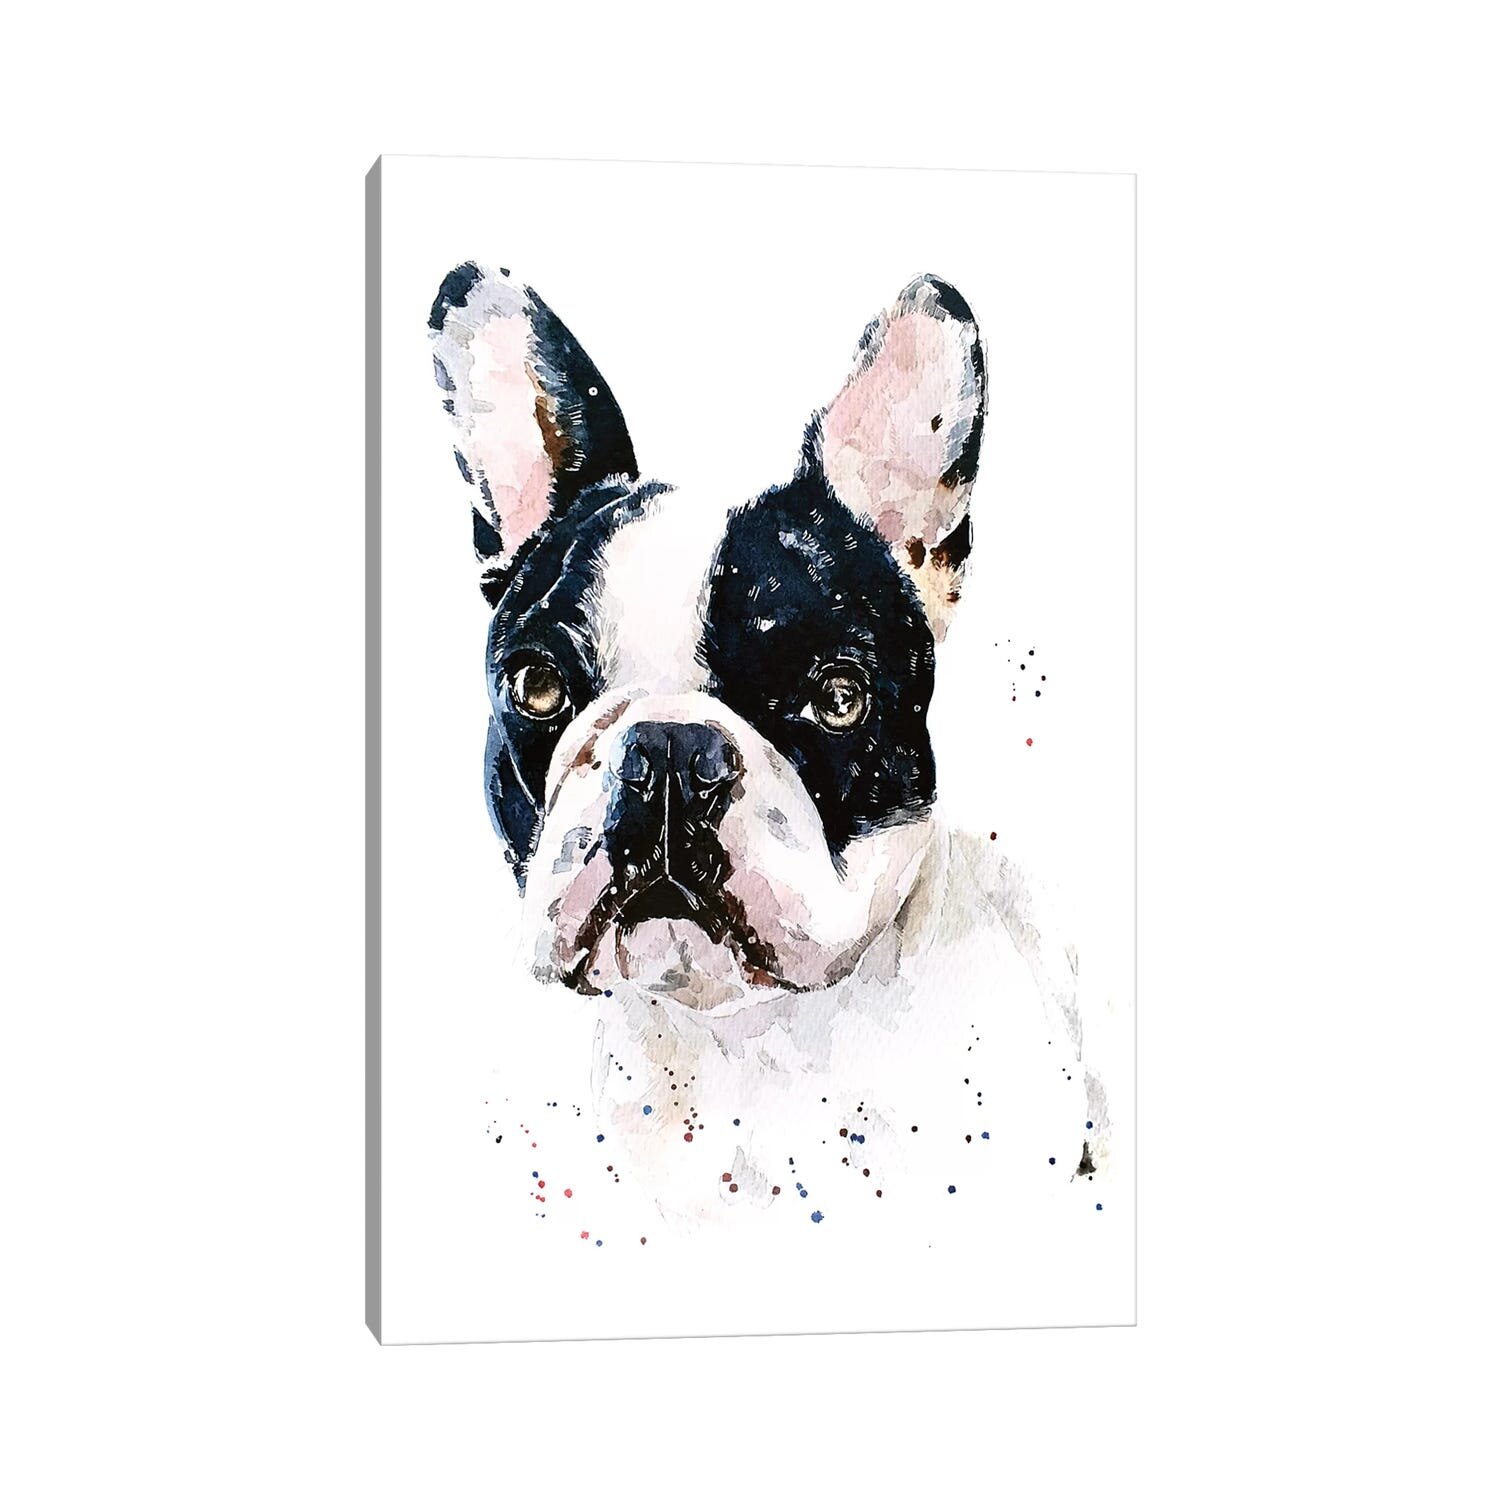 Frenchie Bookstack I Art: Canvas Prints, Frames & Posters